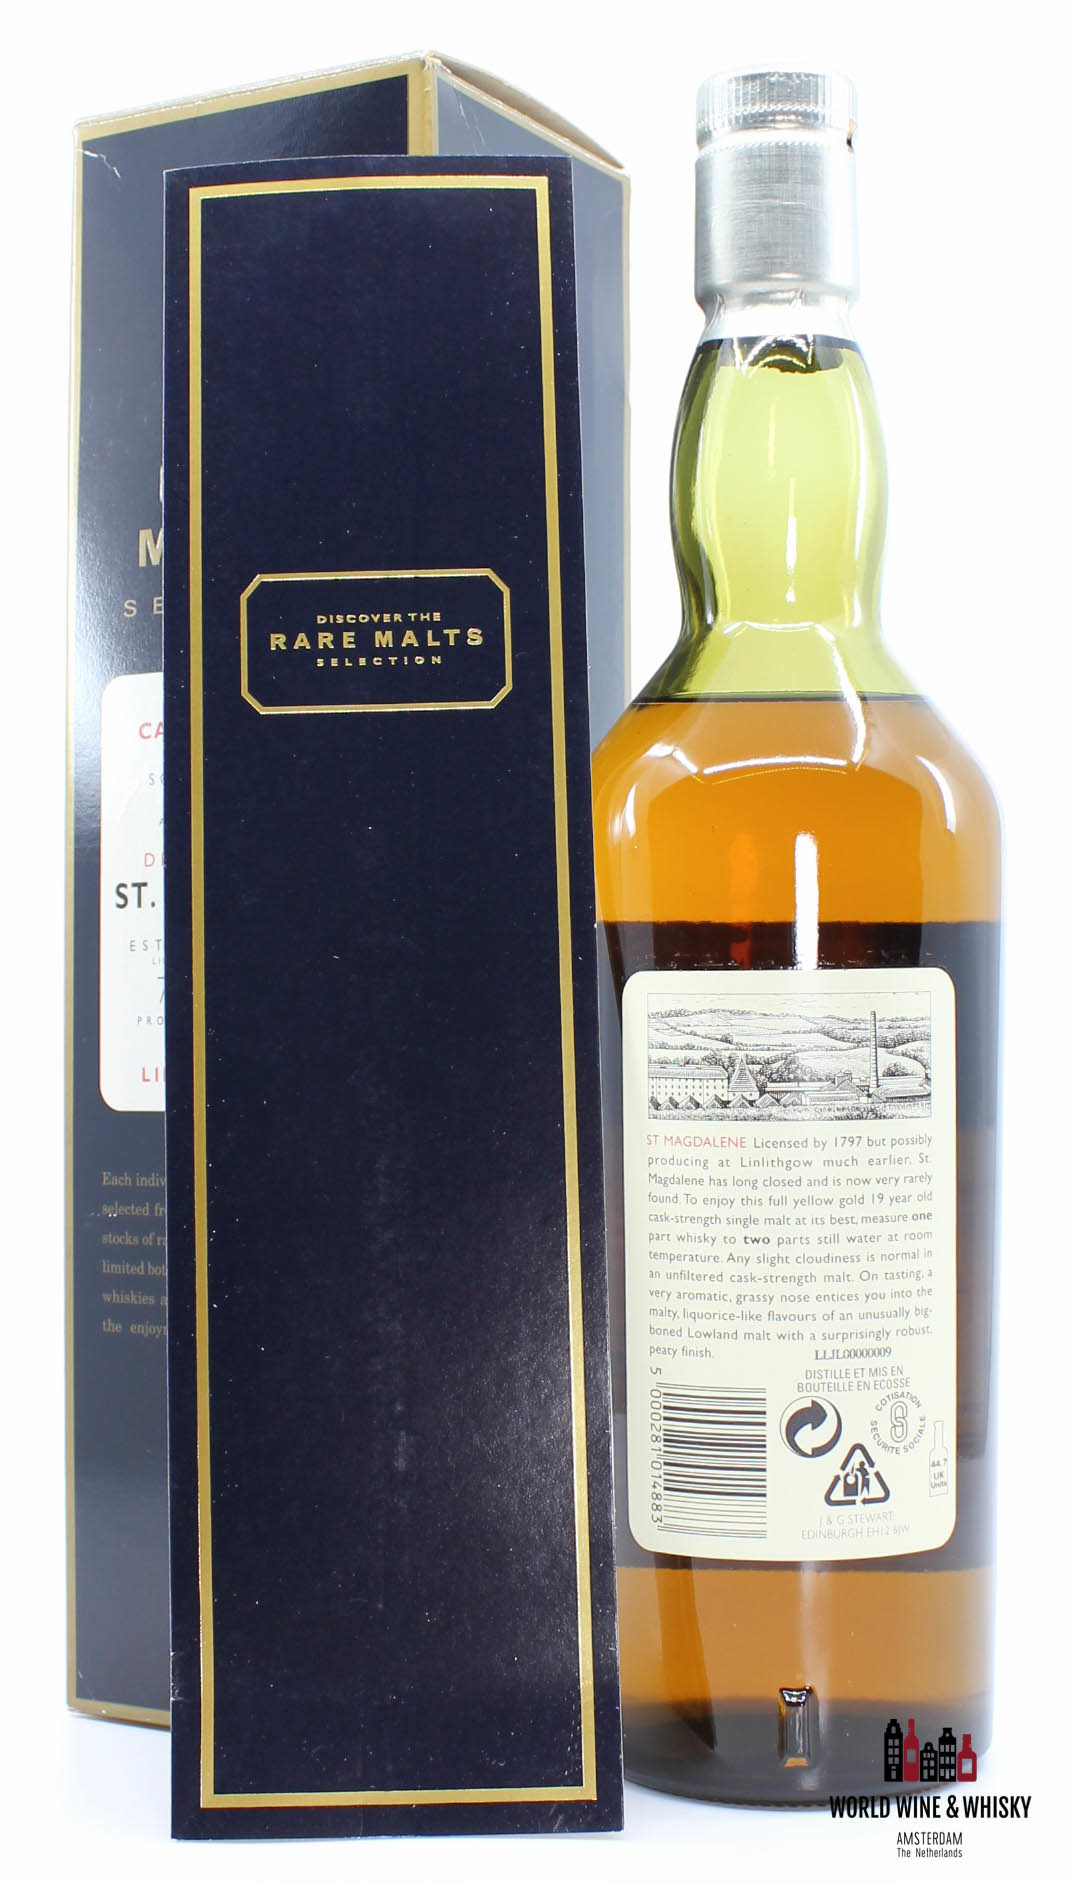 St Magdalene St Magdalene 19 Years Old 1979 1998 Rare Malts Selection - Limited Edition 63.8%